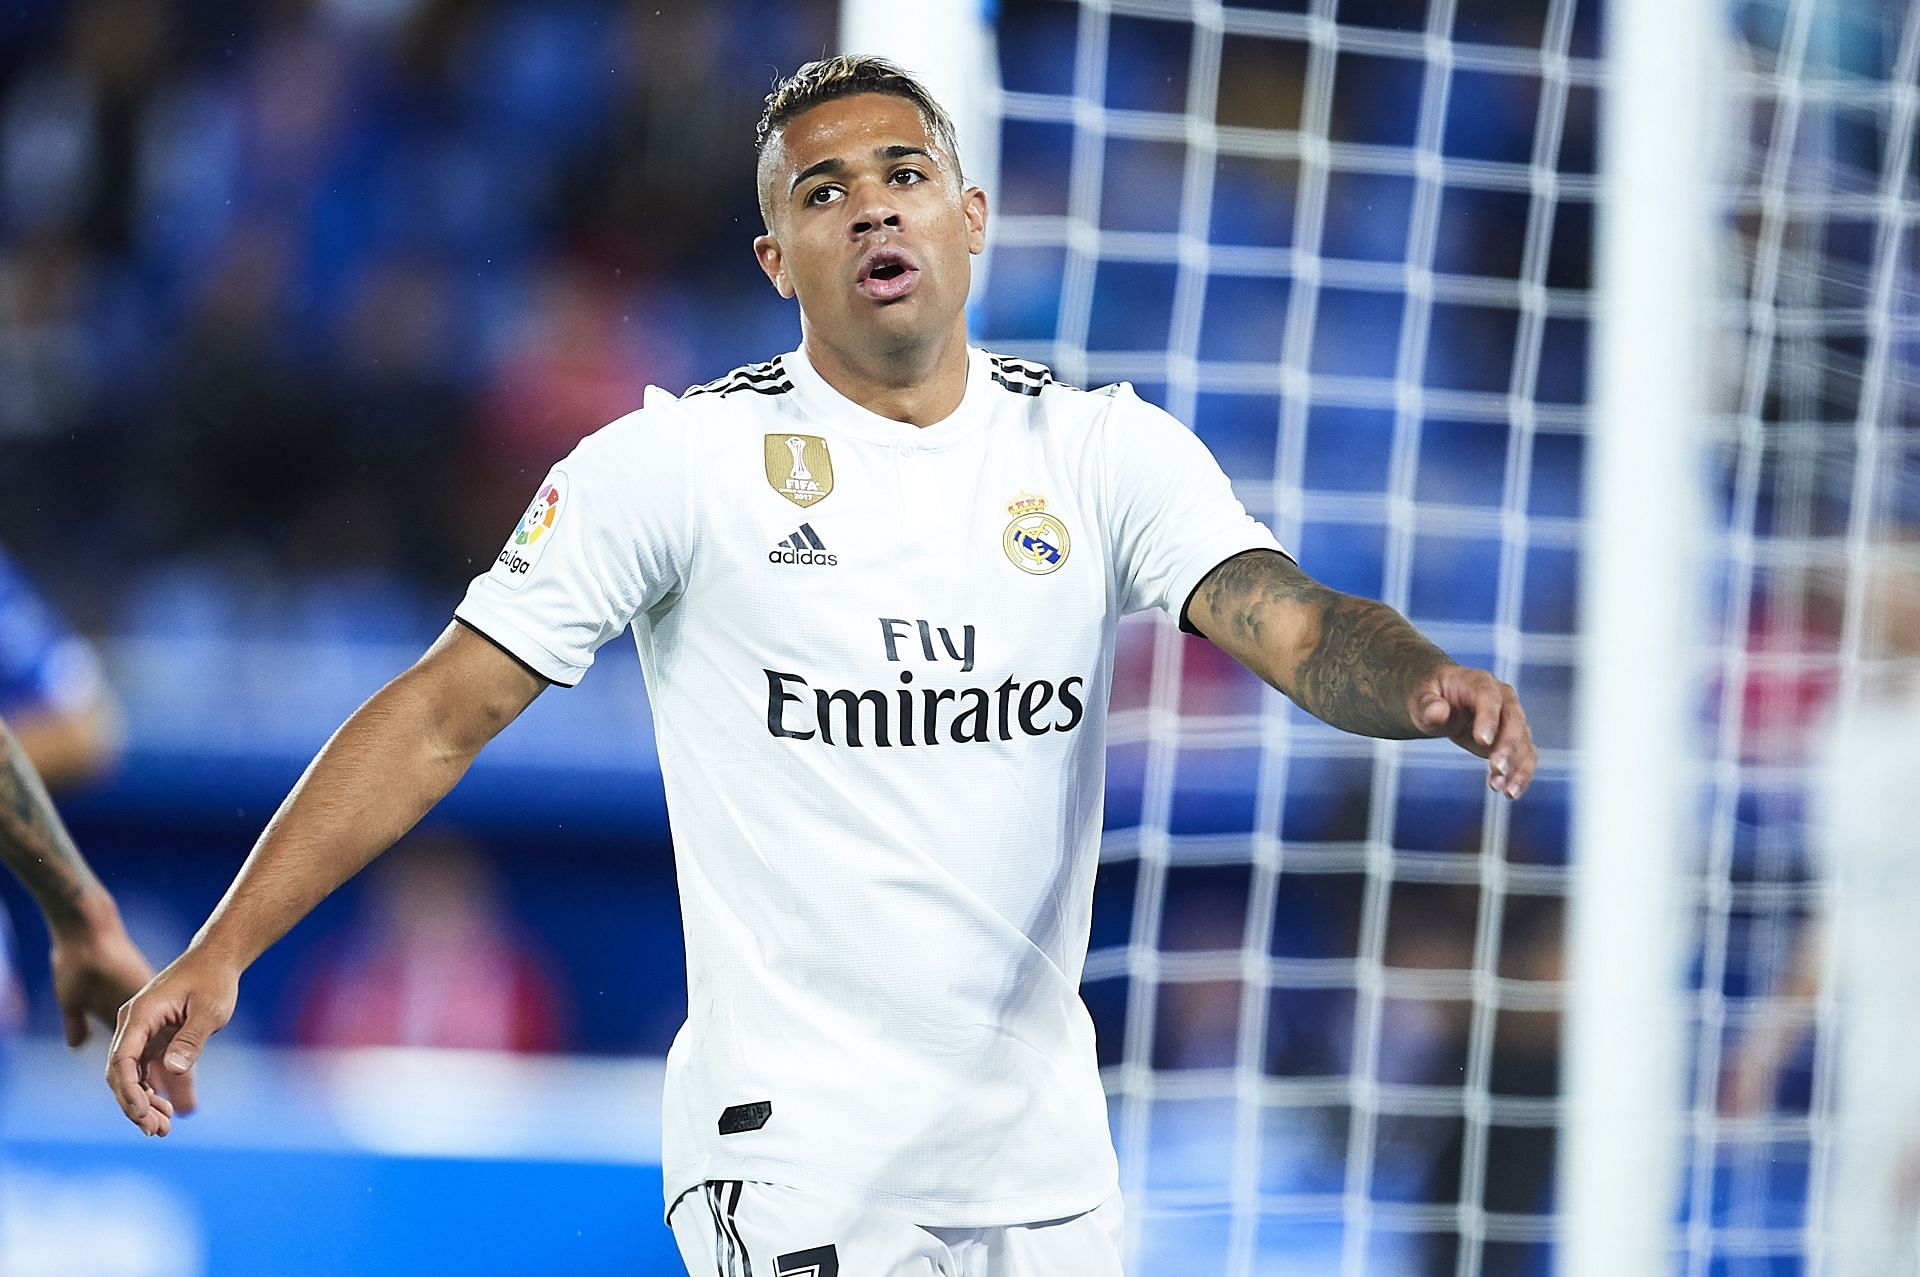 Mariano Diaz has been on the fringes at the Bernabeu